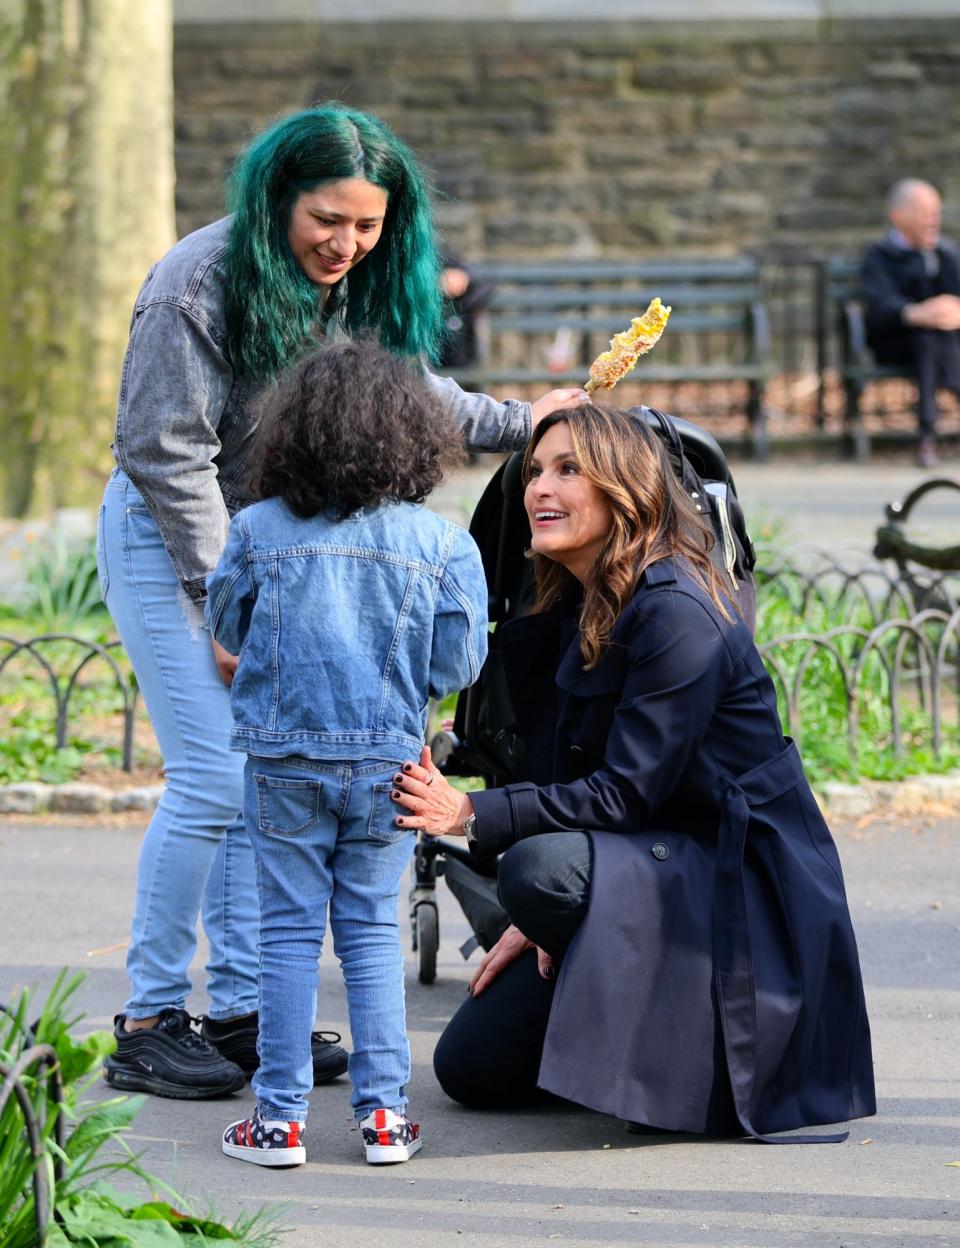 Mariska Hargitay taking a break from filming Law and Order: SVU to help a child at the Fort Tryon Playground, photo by Jose Perez/Bauer-Griffin/GC Images via Getty Images